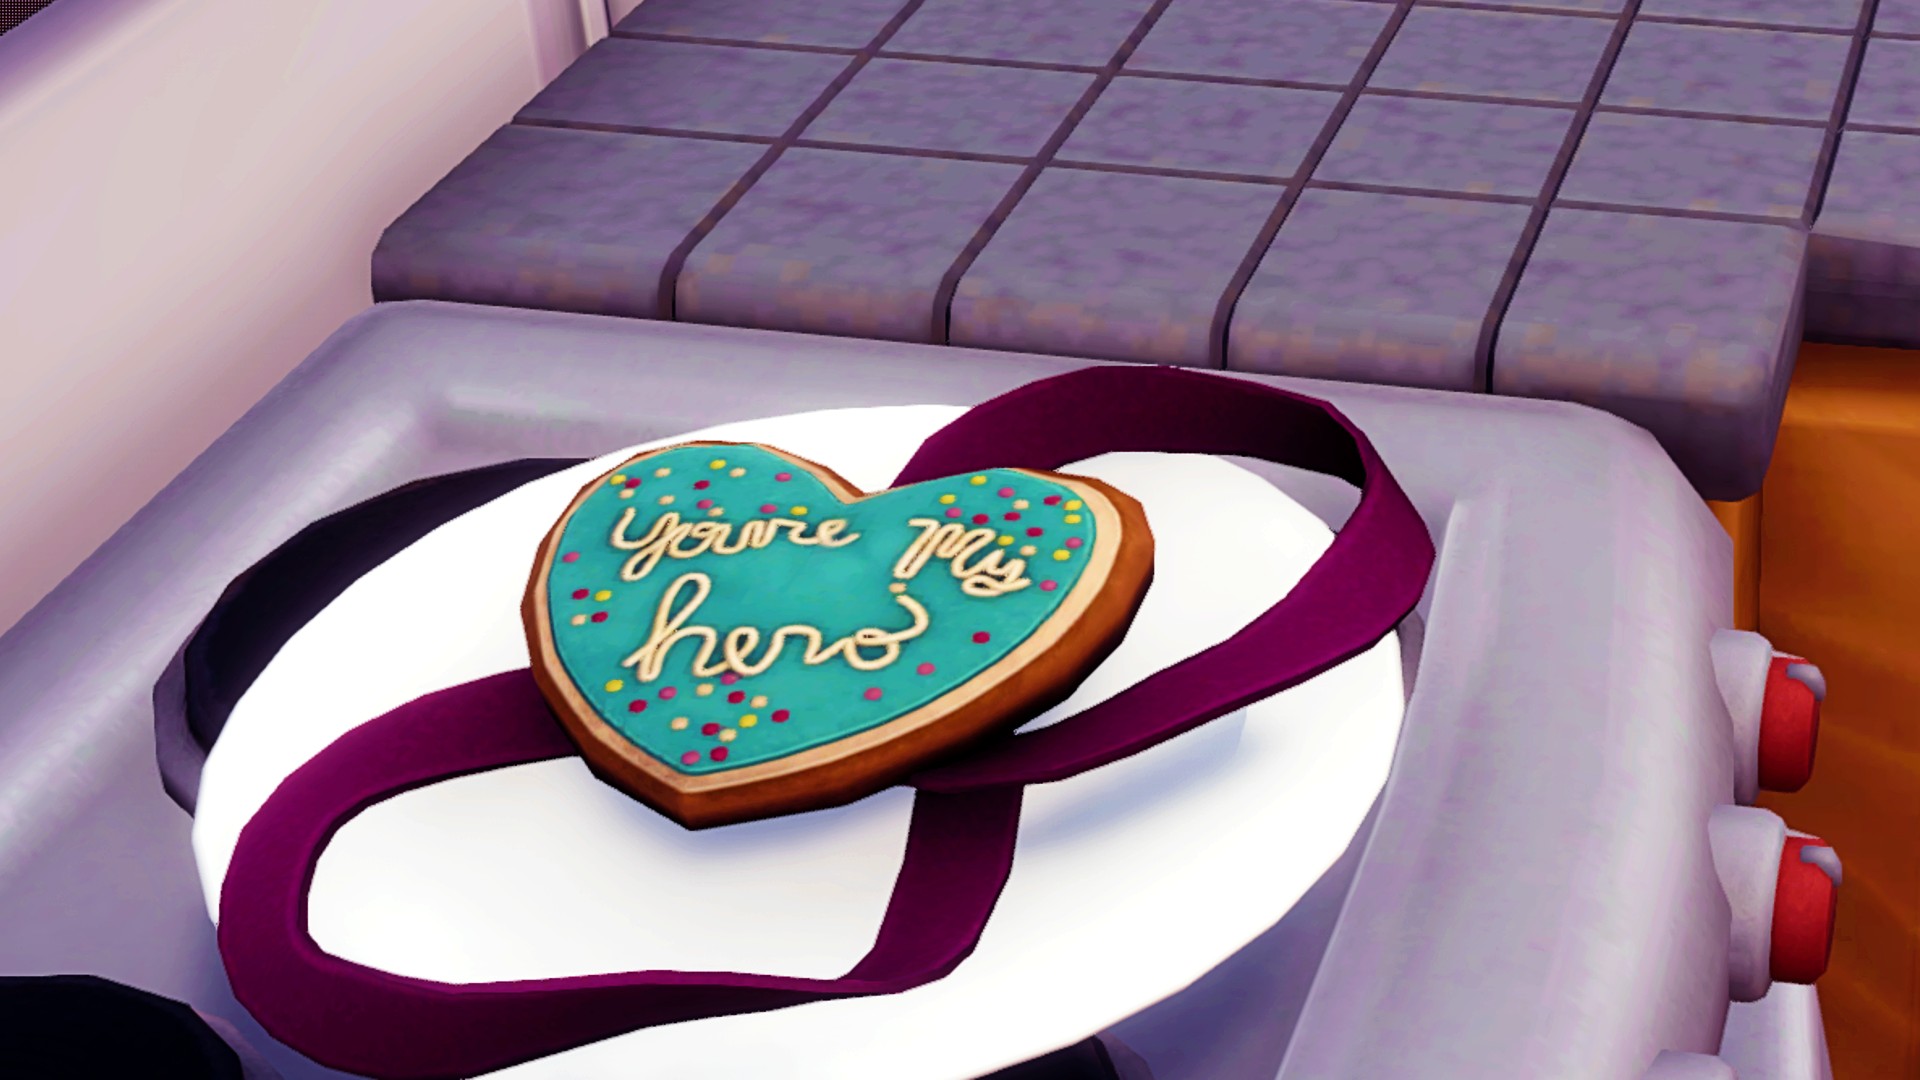 Disney Dreamlight Valley three star recipes: My Hero Cookie, the word's "you're my hero" in cream on a teal icing background, on a heart-shaped cookie, a reference to the cookie in Wreck it Ralph.